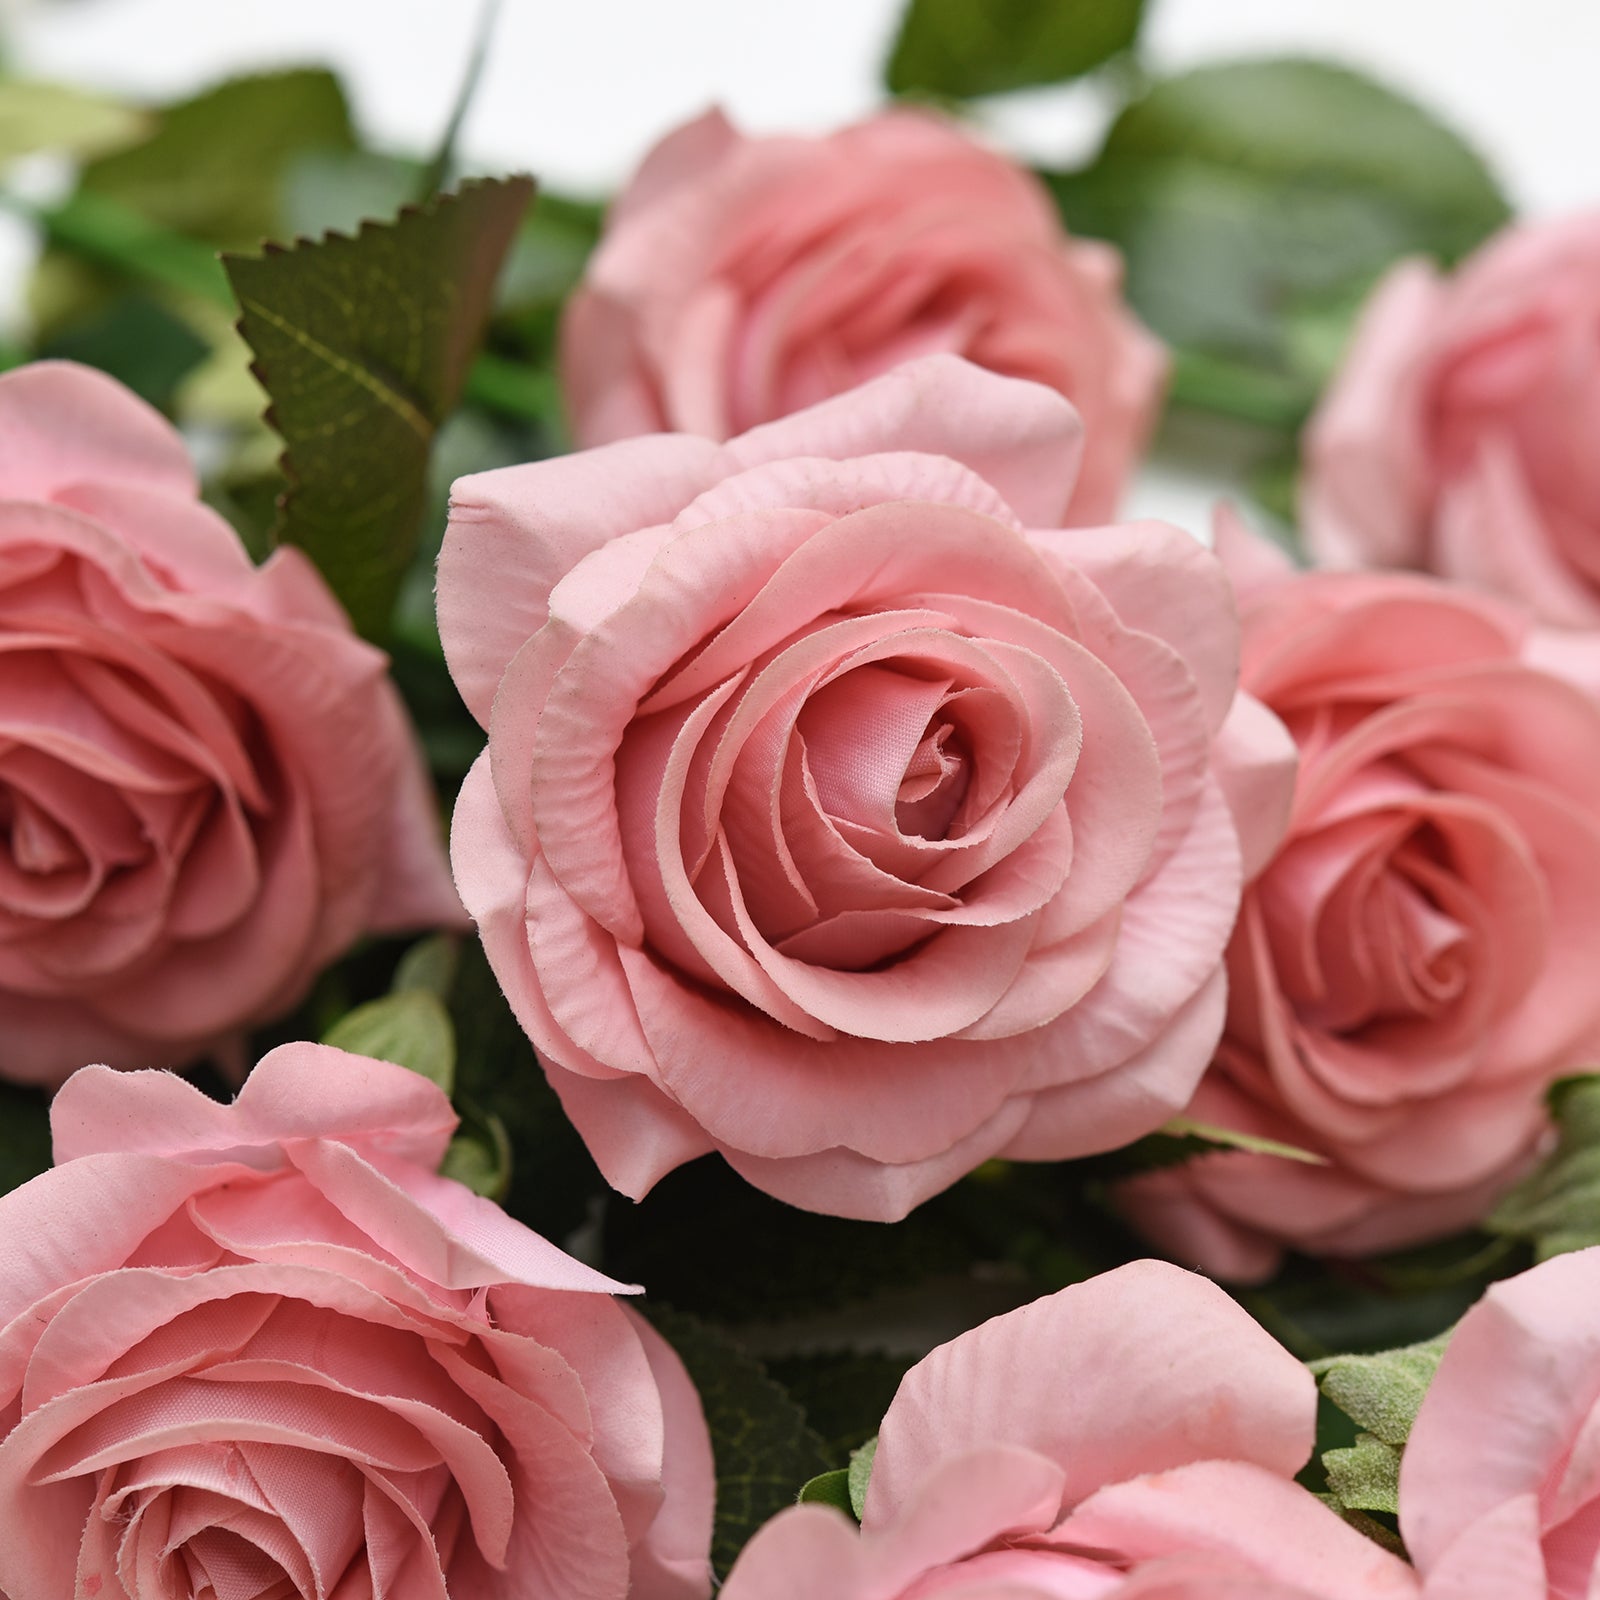 Real Touch 10 Stems Dusty Pink Silk Artificial Roses Flowers ‘Petals Feel and Look like Fresh Roses